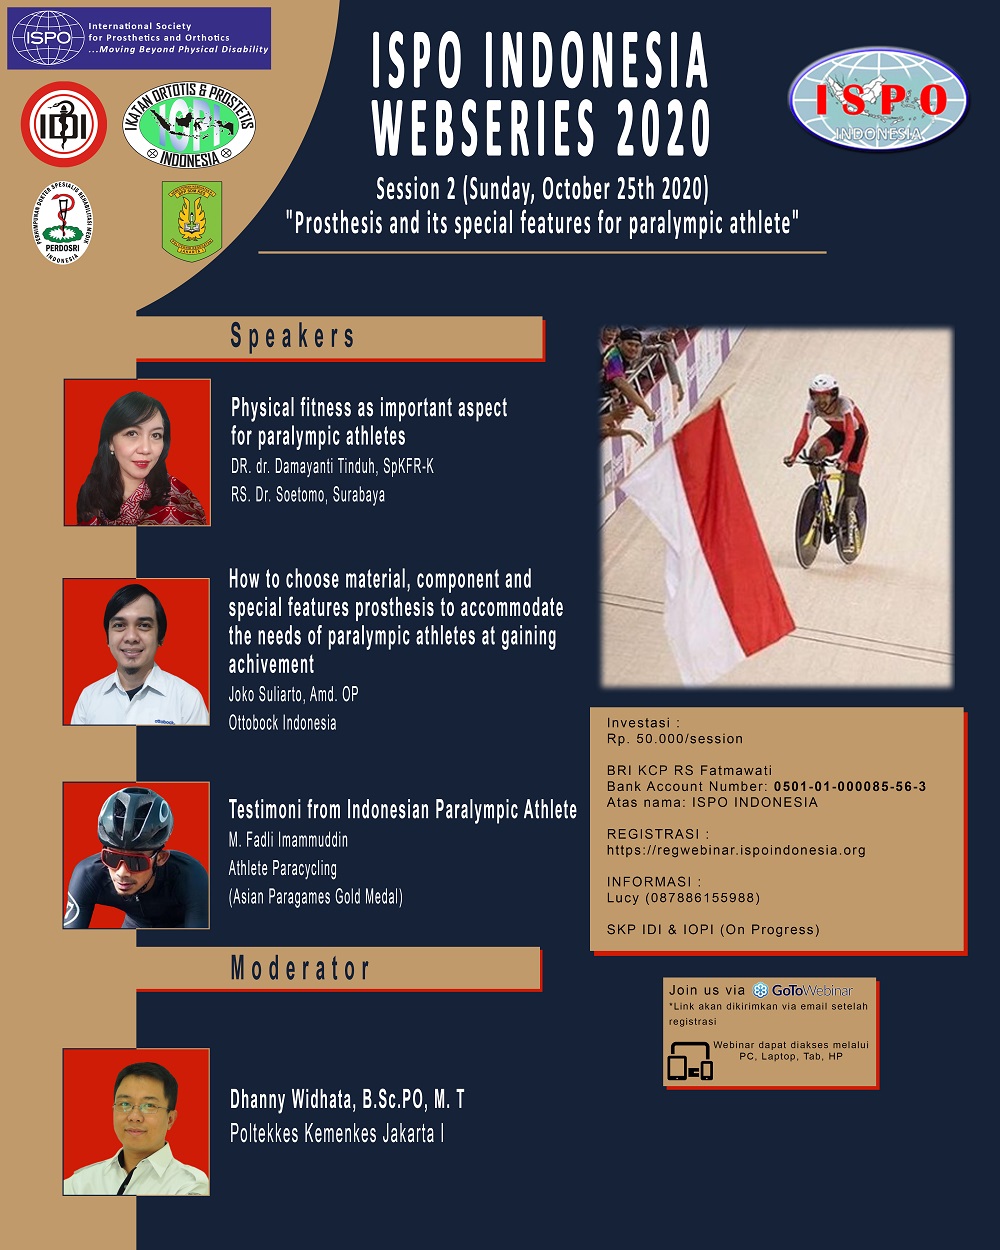 Session 2 (Sunday, October 25th 2020): Prosthesis and its special features for paralympic athlete